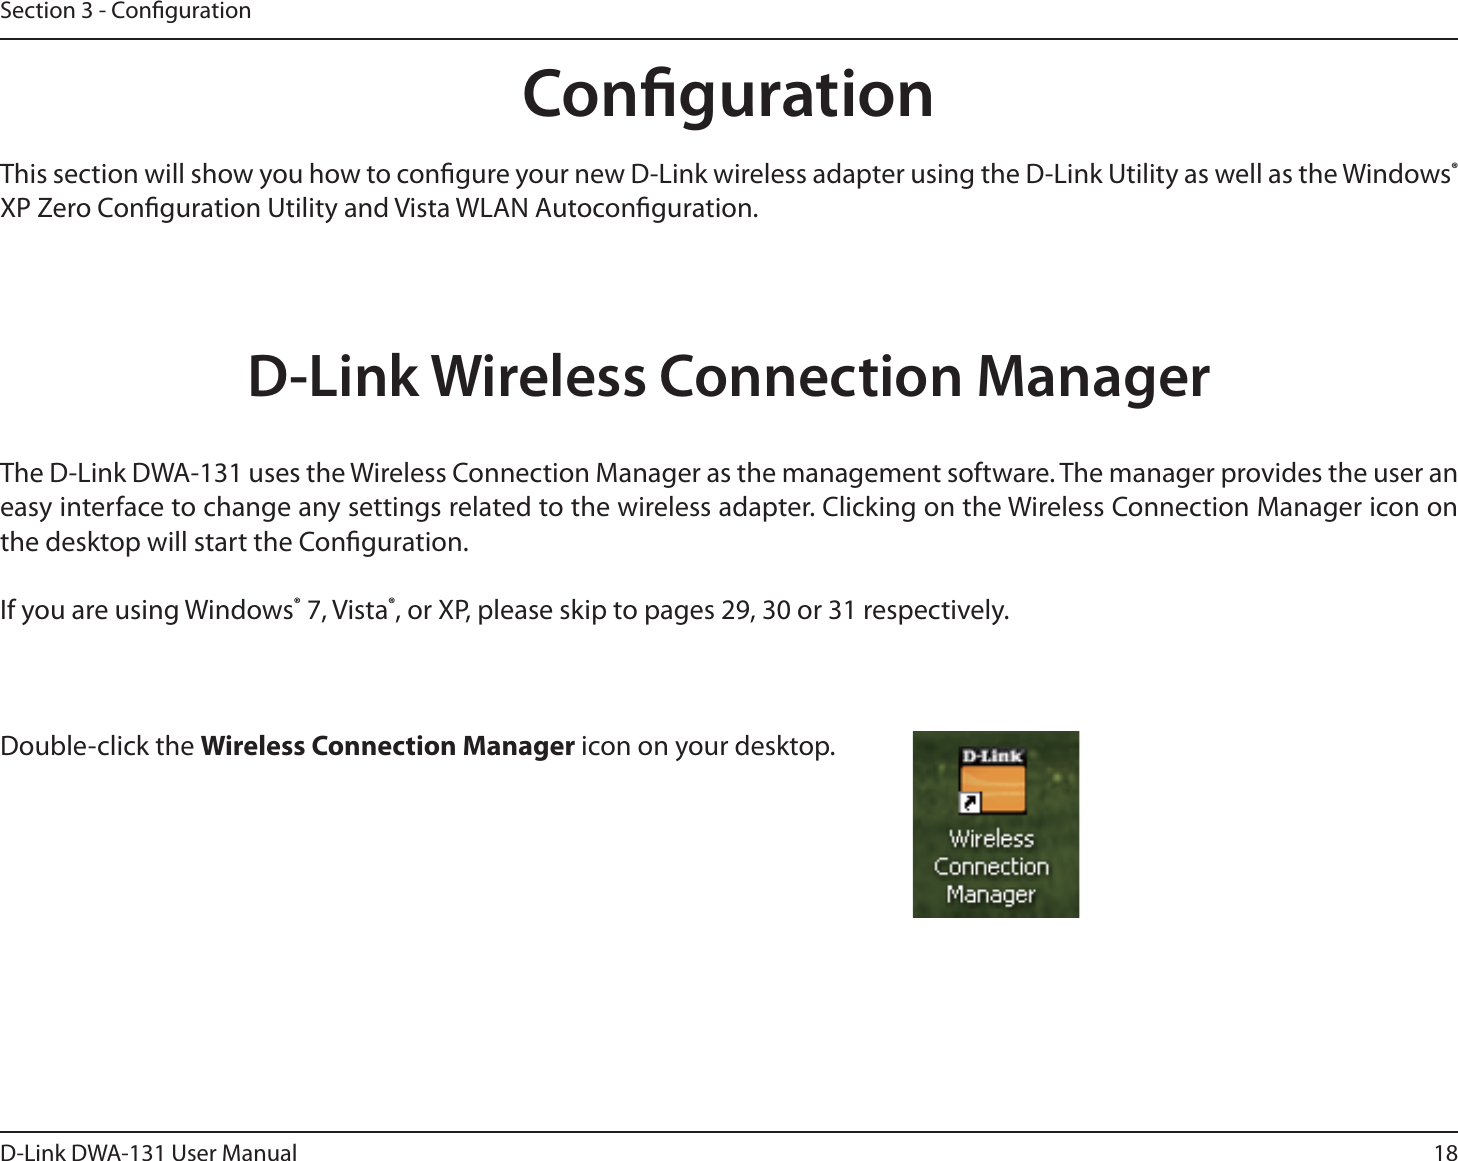 18D-Link DWA-131 User ManualSection 3 - CongurationCongurationThis section will show you how to congure your new D-Link wireless adapter using the D-Link Utility as well as the Windows® XP Zero Conguration Utility and Vista WLAN Autoconguration.D-Link Wireless Connection ManagerThe D-Link DWA-131 uses the Wireless Connection Manager as the management software. The manager provides the user an easy interface to change any settings related to the wireless adapter. Clicking on the Wireless Connection Manager icon on the desktop will start the Conguration.If you are using Windows® 7, Vista®, or XP, please skip to pages 29, 30 or 31 respectively.Double-click the Wireless Connection Manager icon on your desktop.